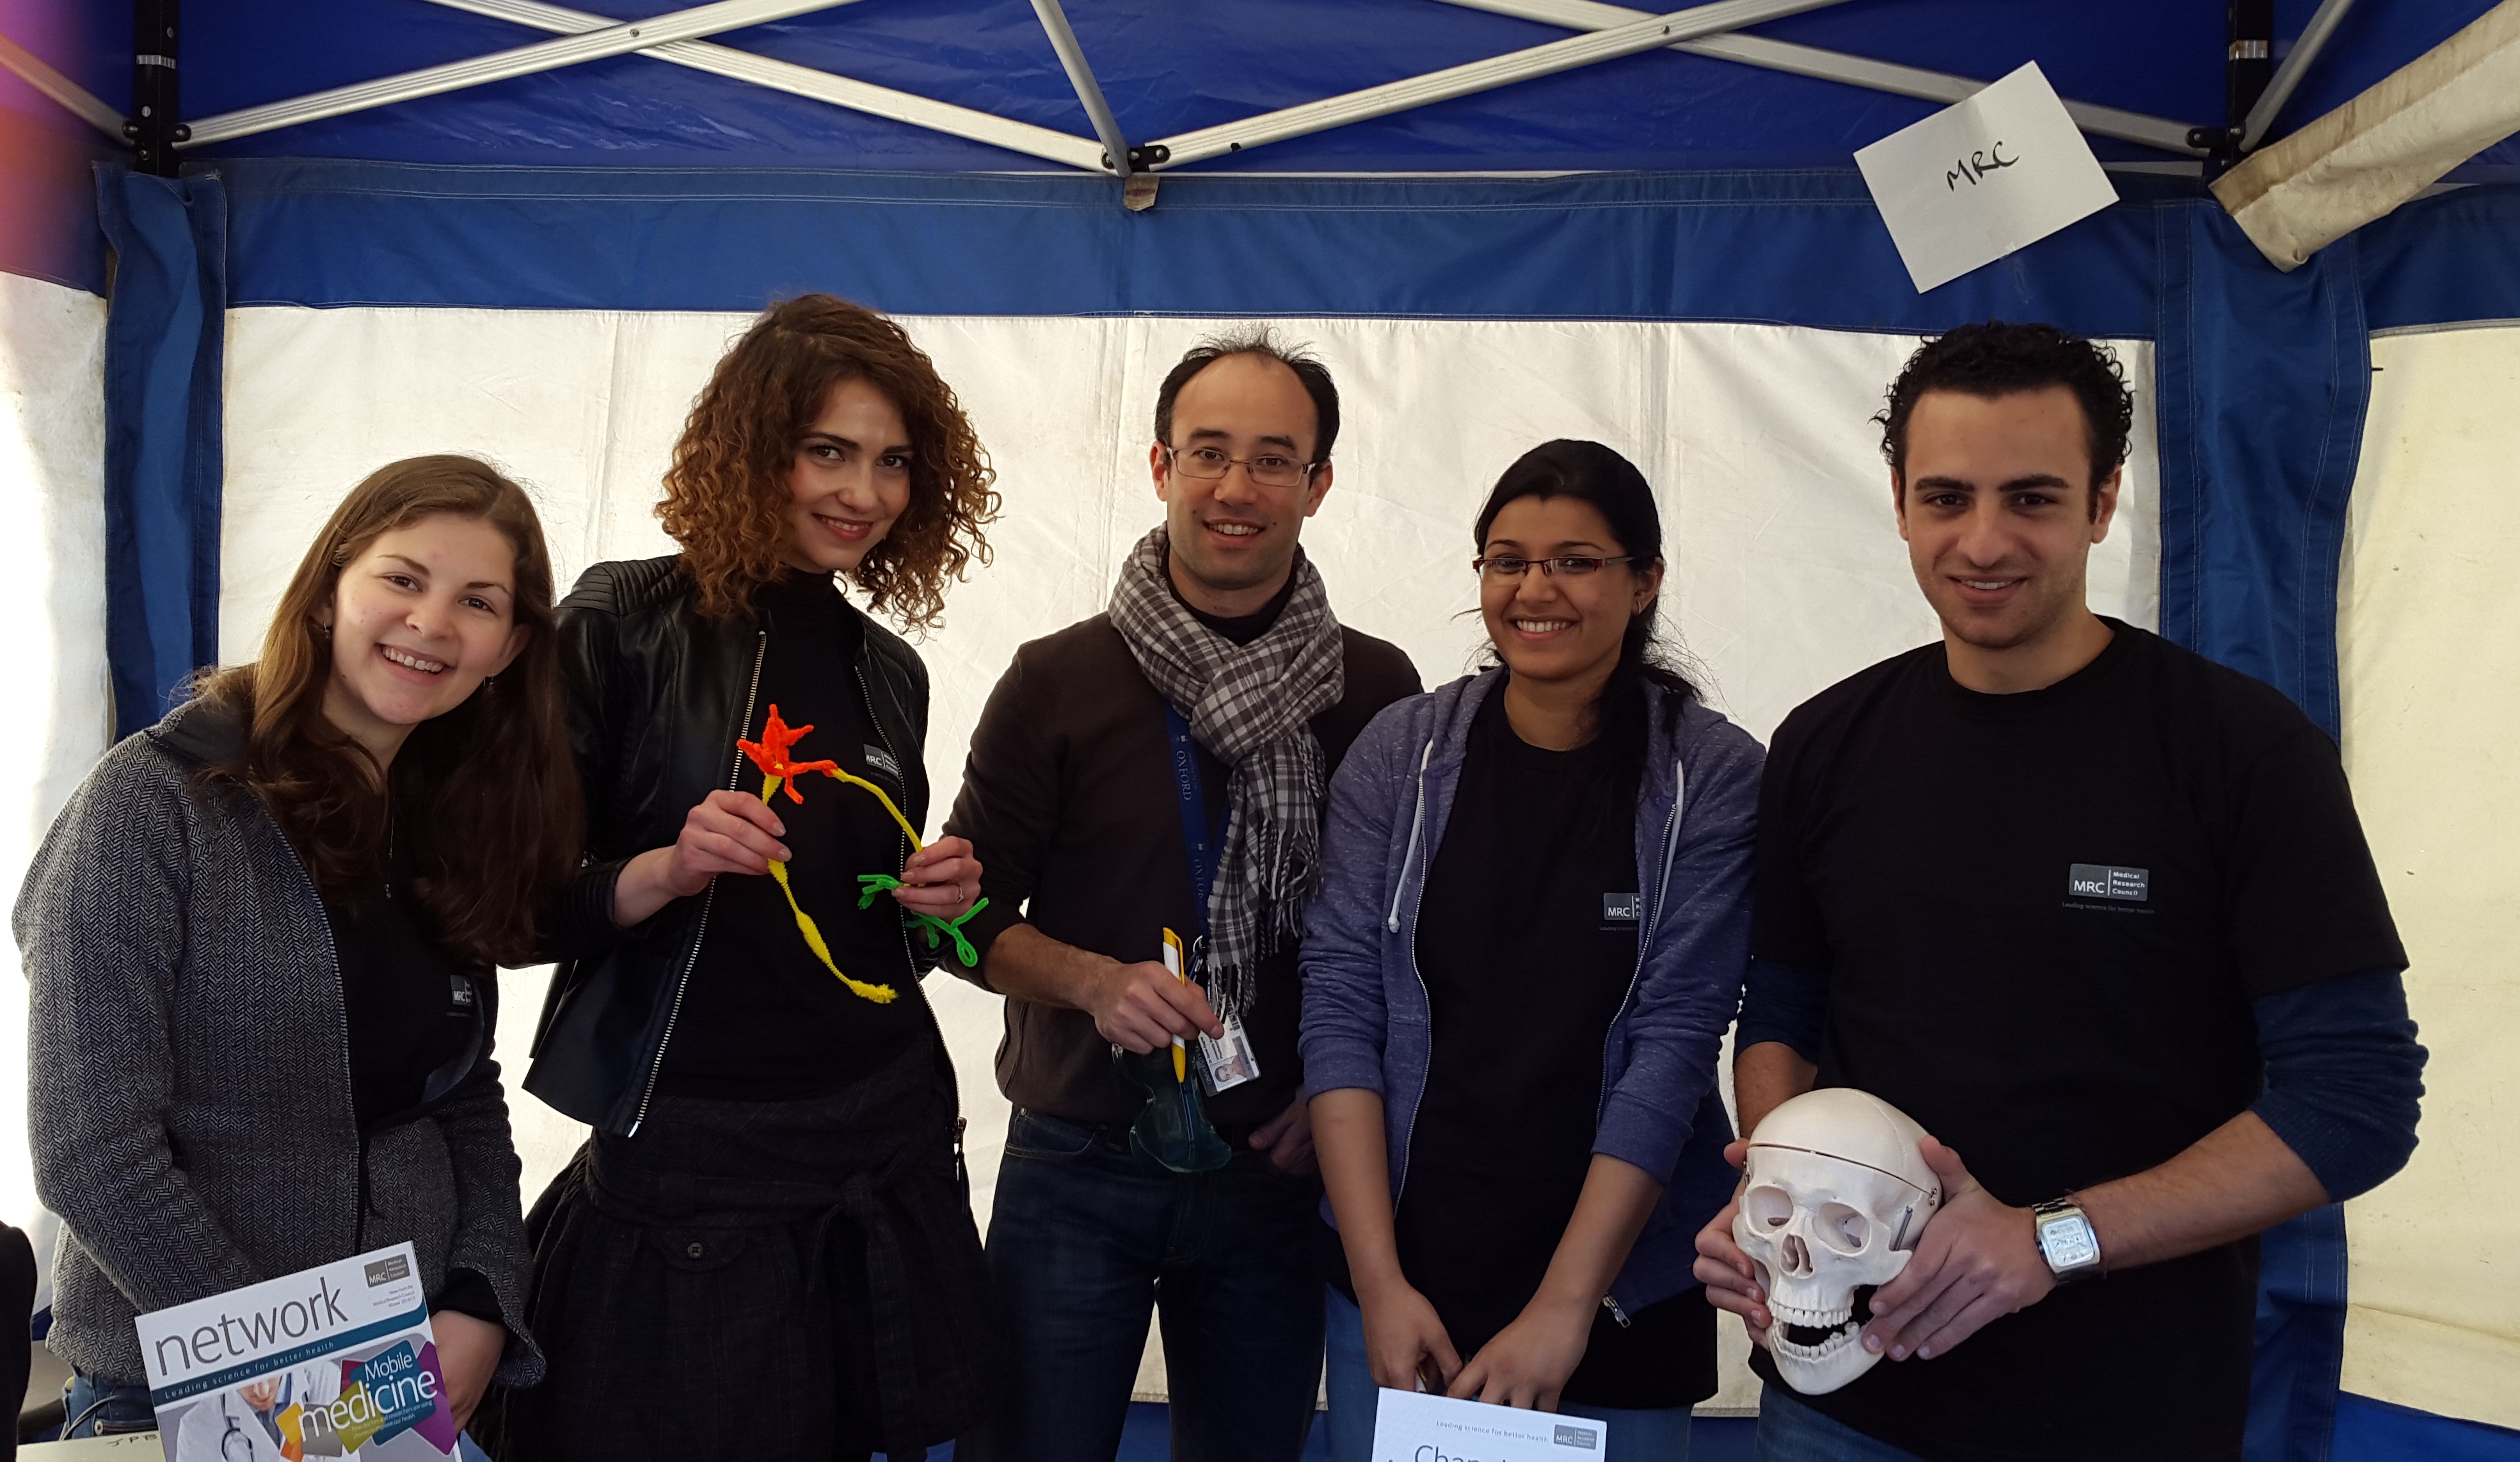 Unit members engage at the Oxfordshire Science Festival 2015